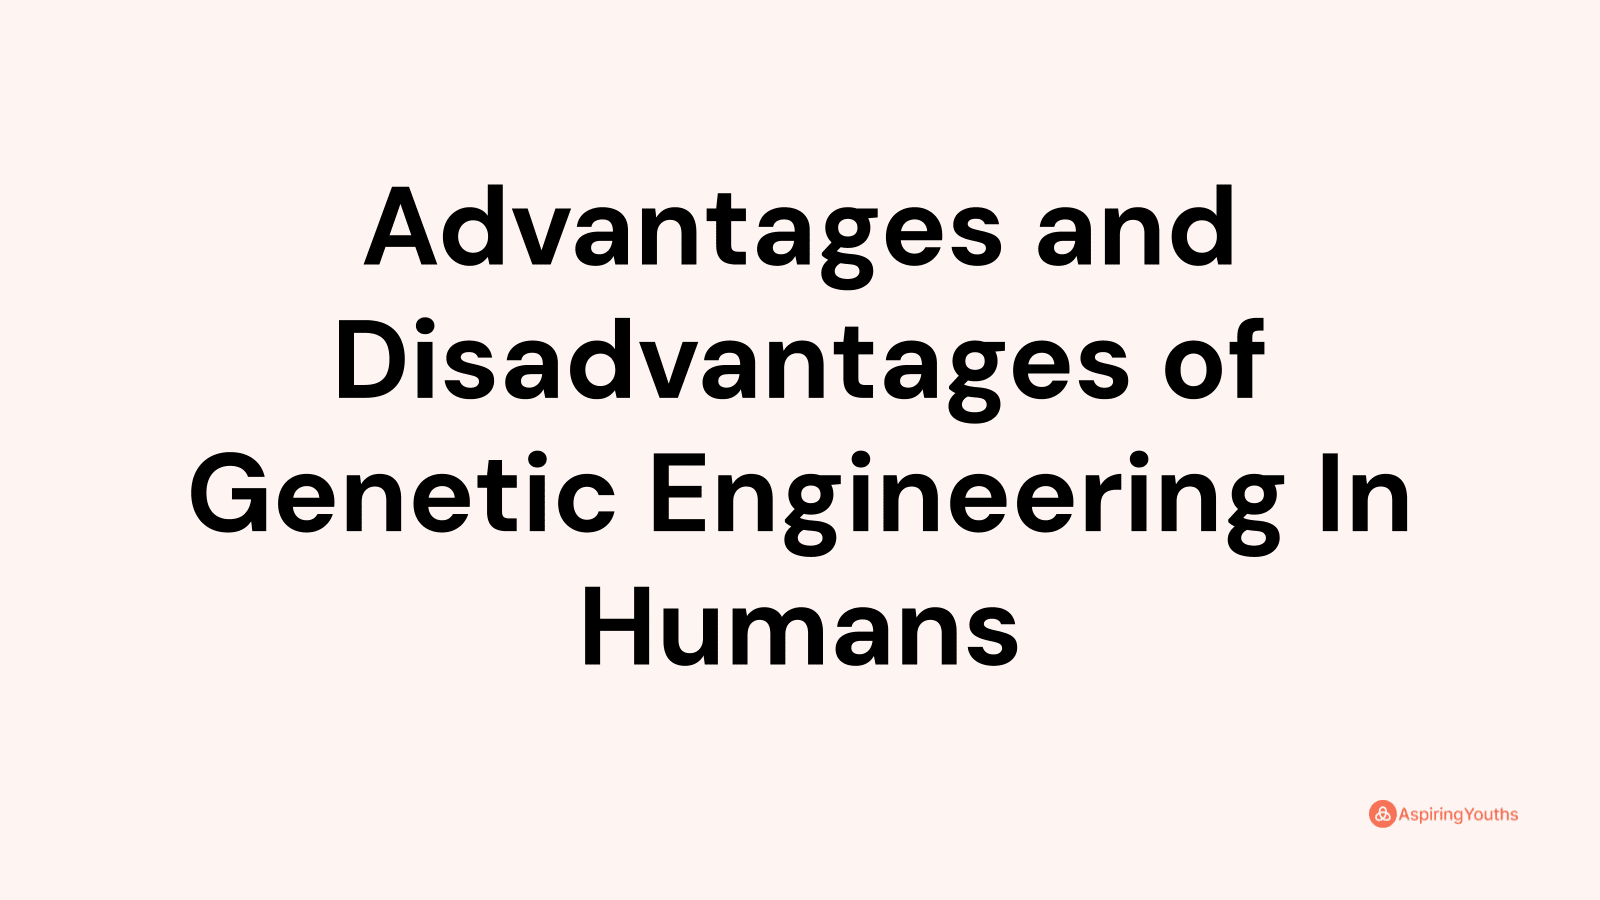 Advantages and disadvantages of Genetic Engineering In Humans